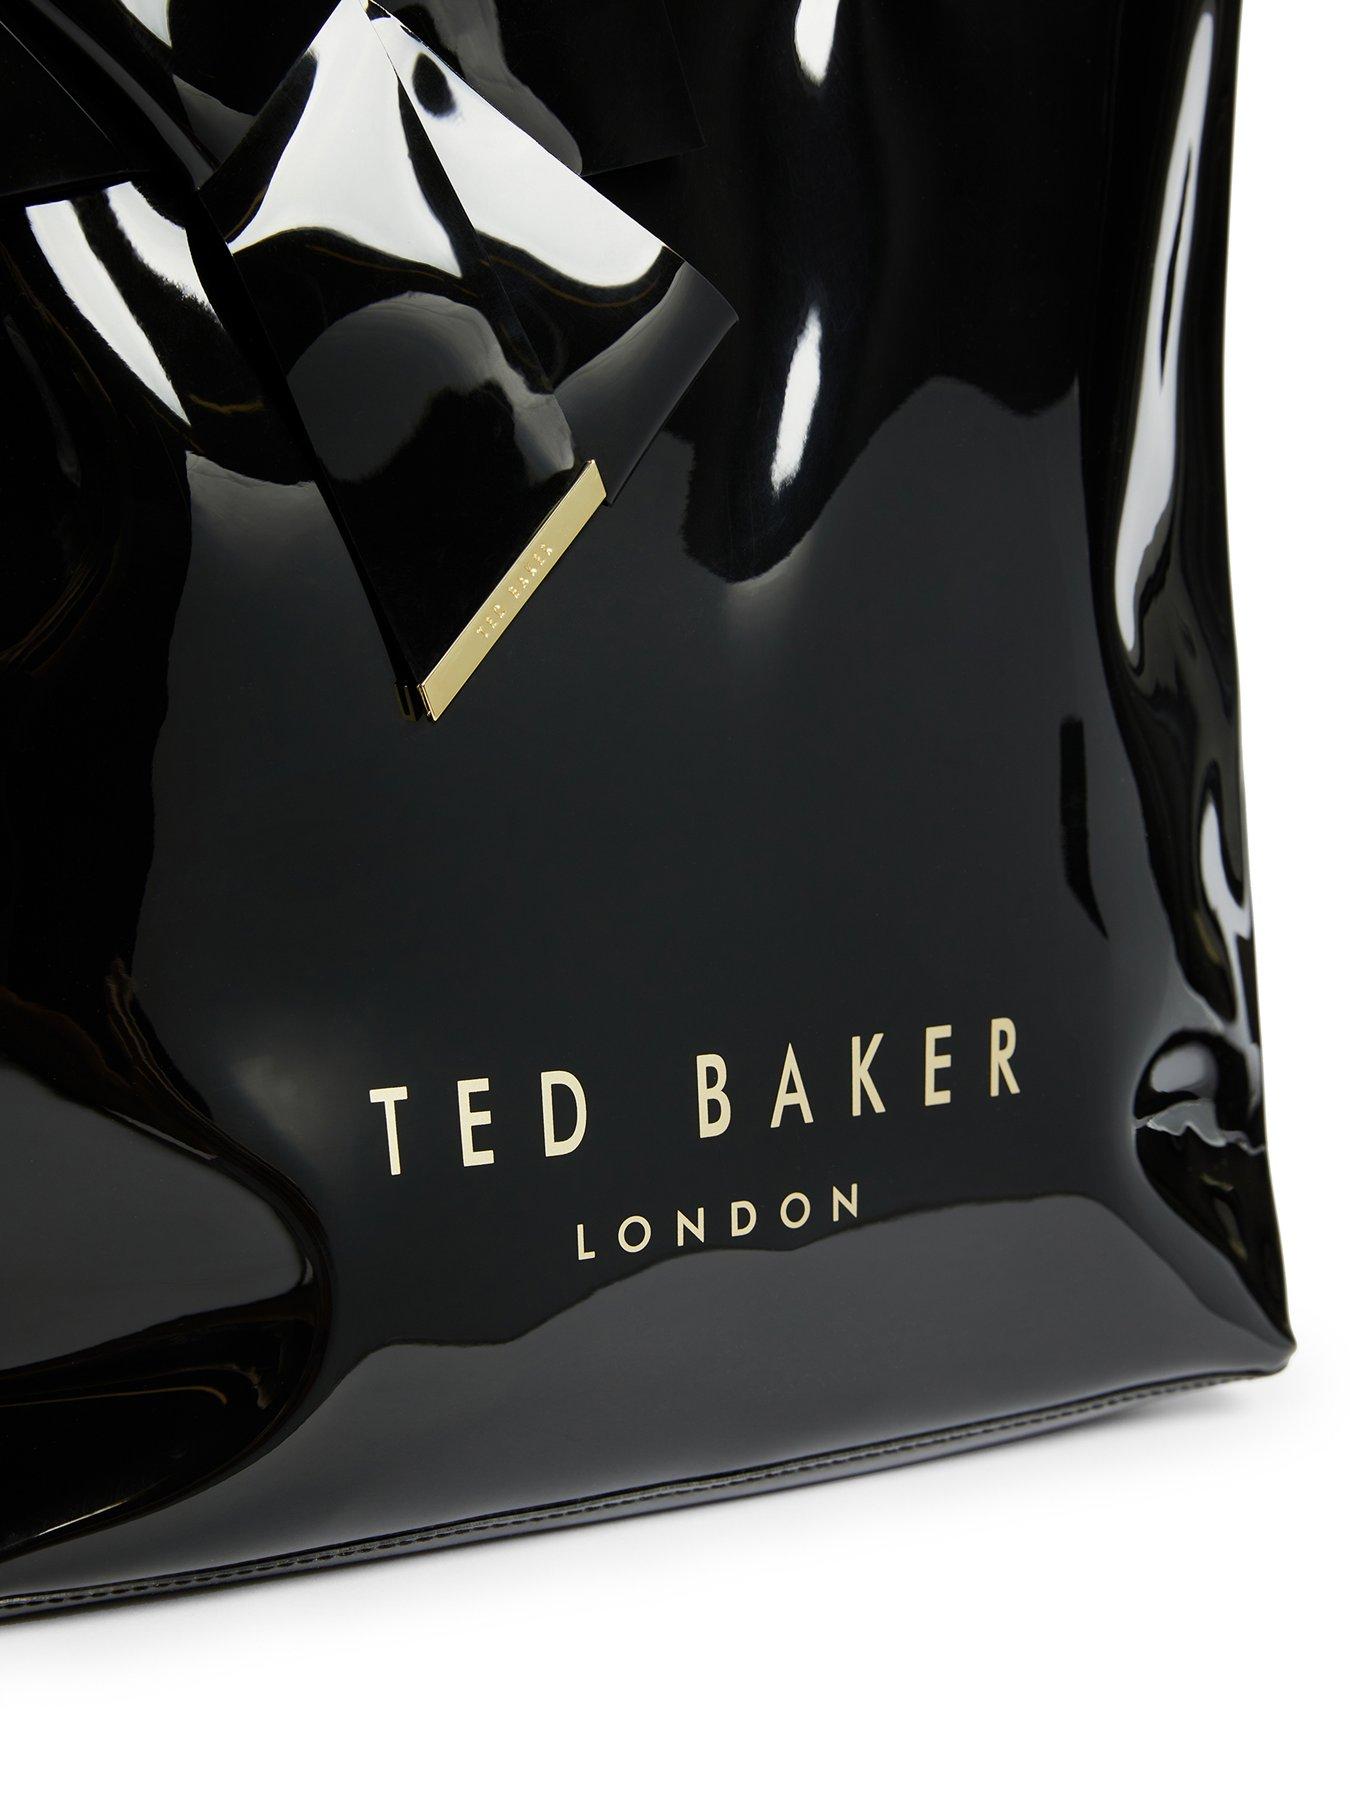 Ted Baker London Small Bow Icon Tote Bag Shopper Black Gold